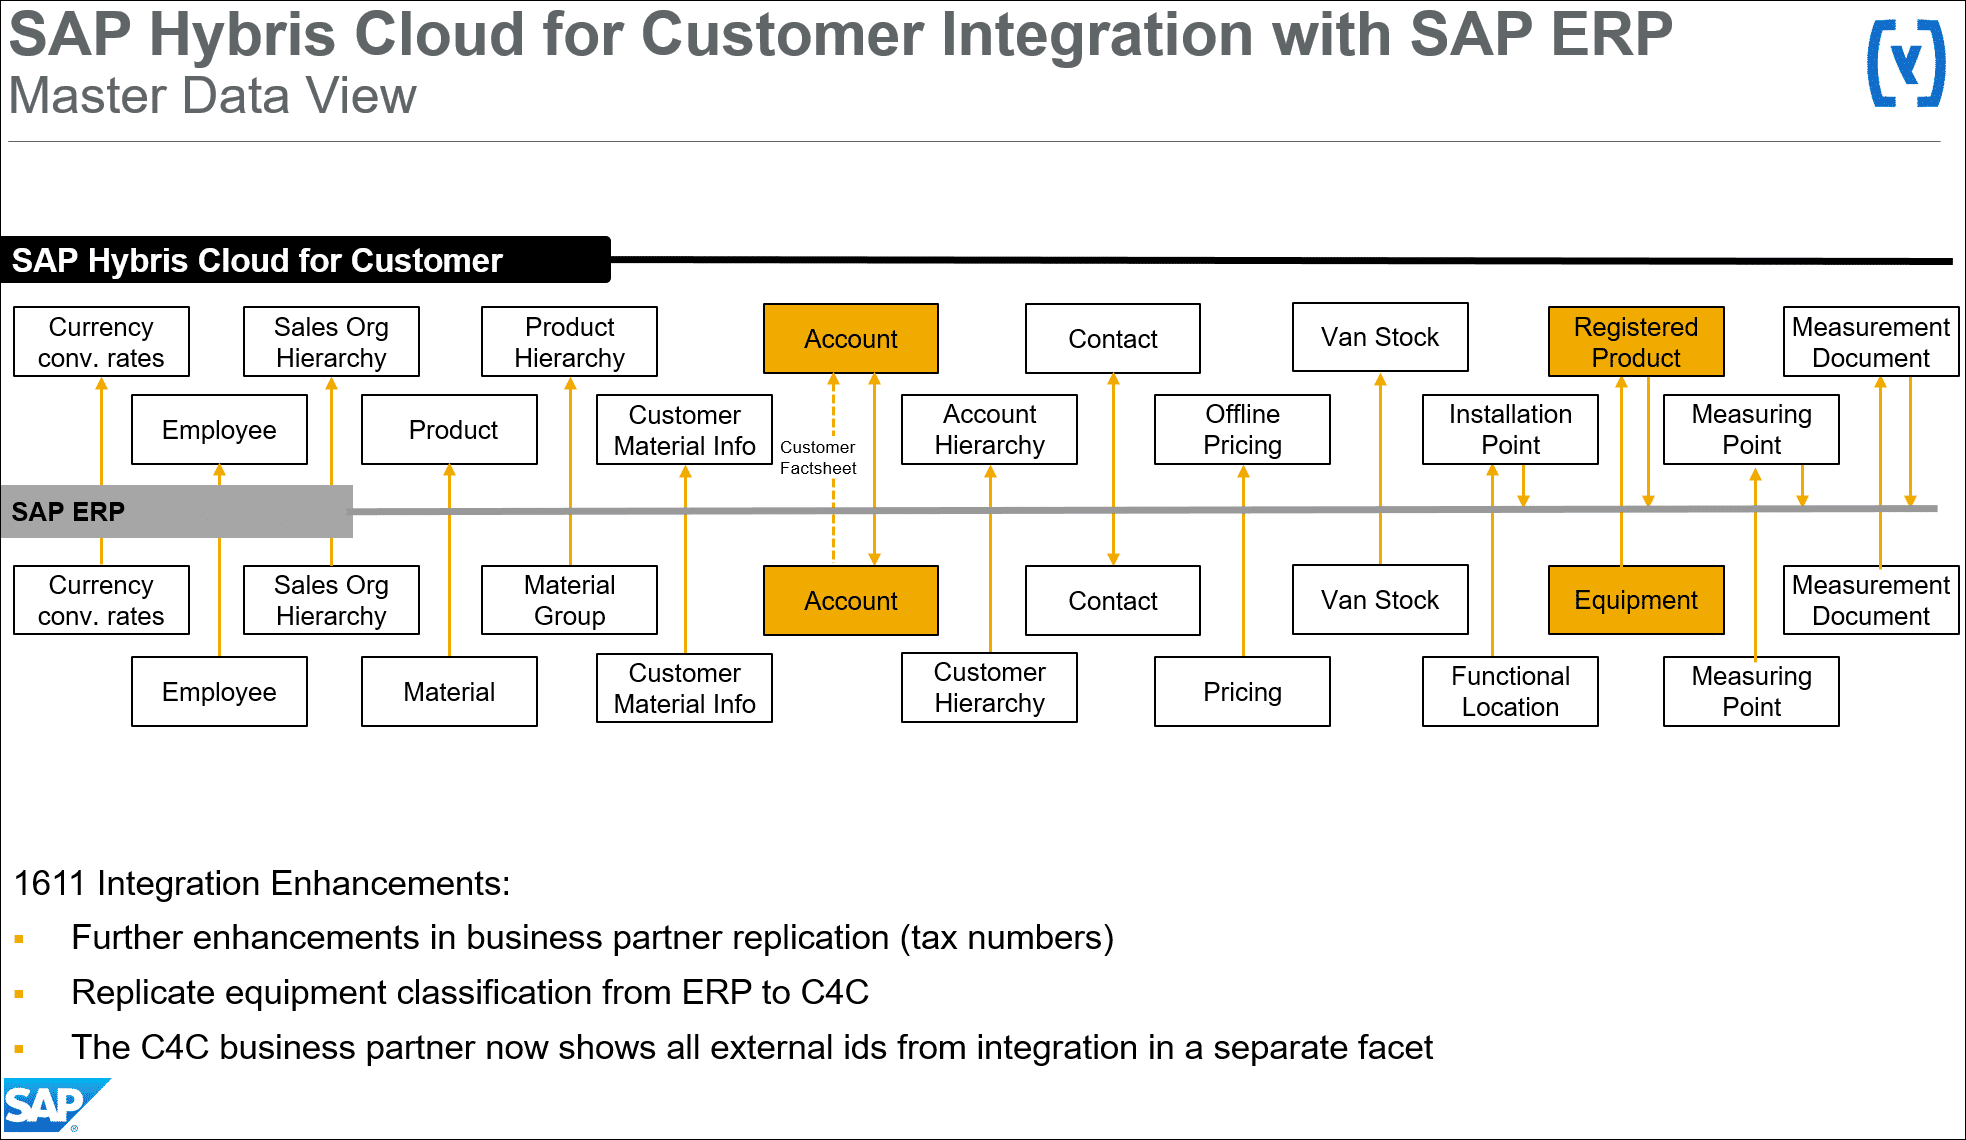 What’s New in 1611 – SAP Hybris Cloud for Customer